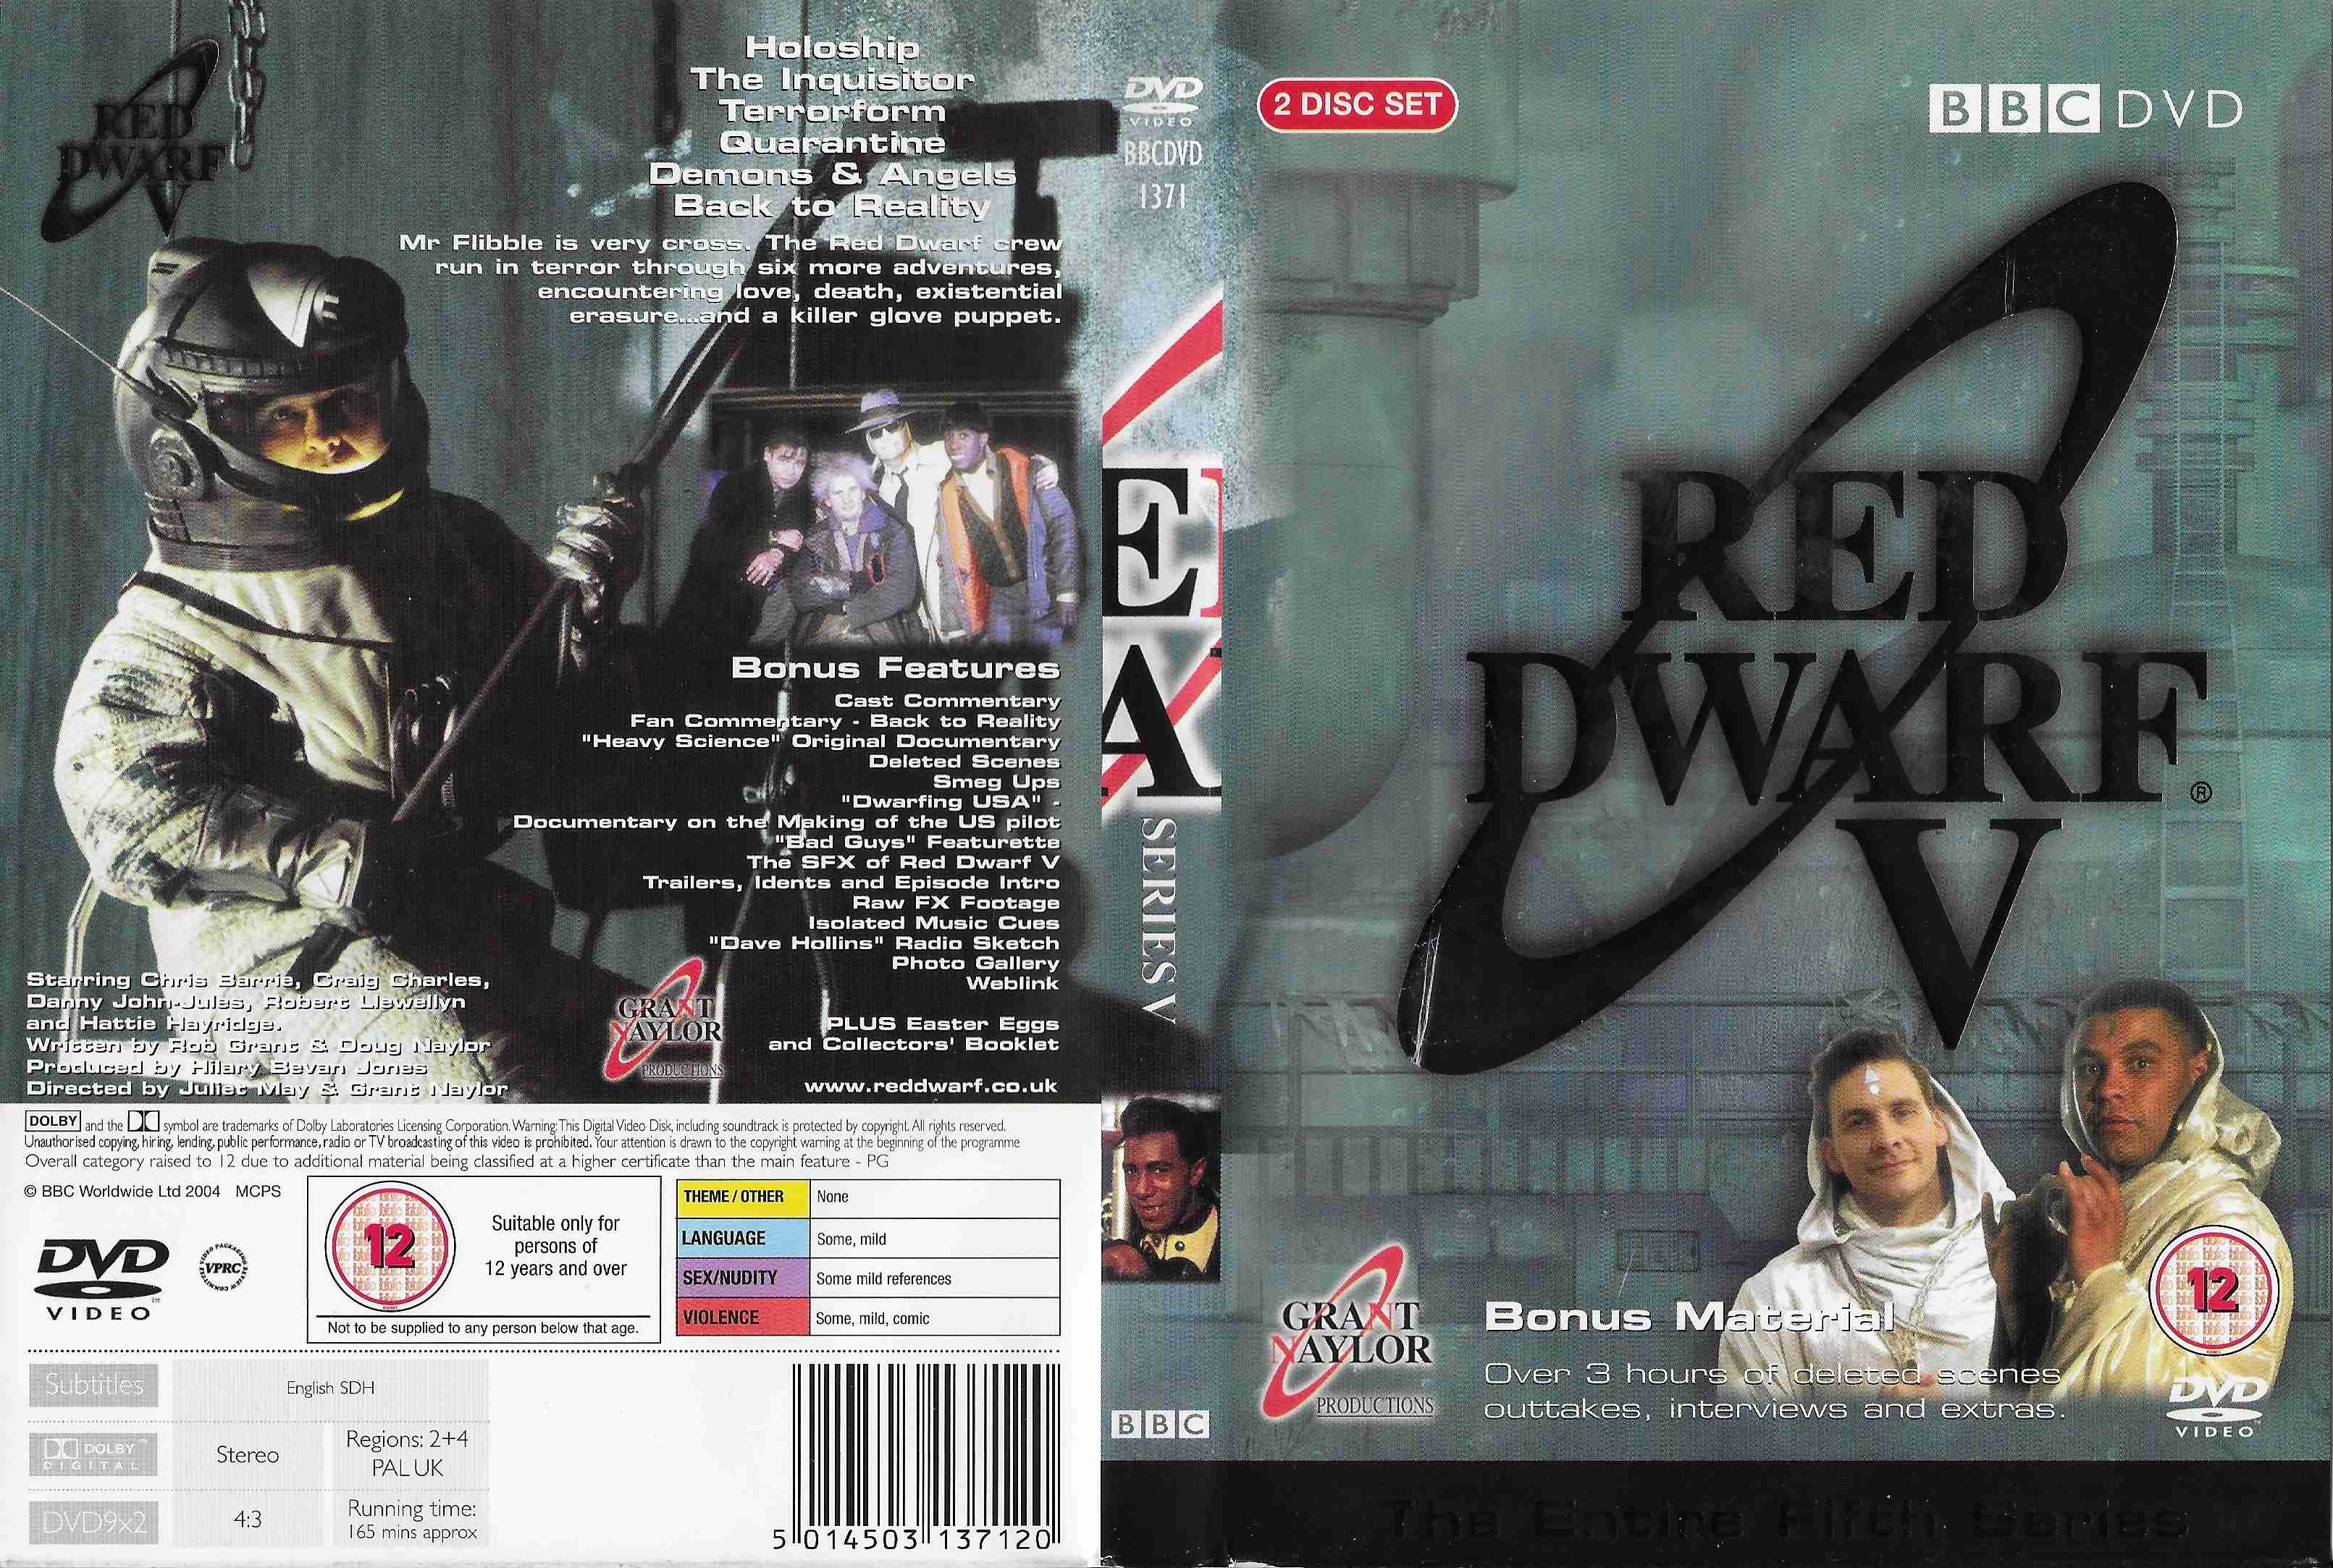 Picture of BBCDVD 1592 Red dwarf - Series V by artist Rob Grant / Doug Naylor from the BBC records and Tapes library